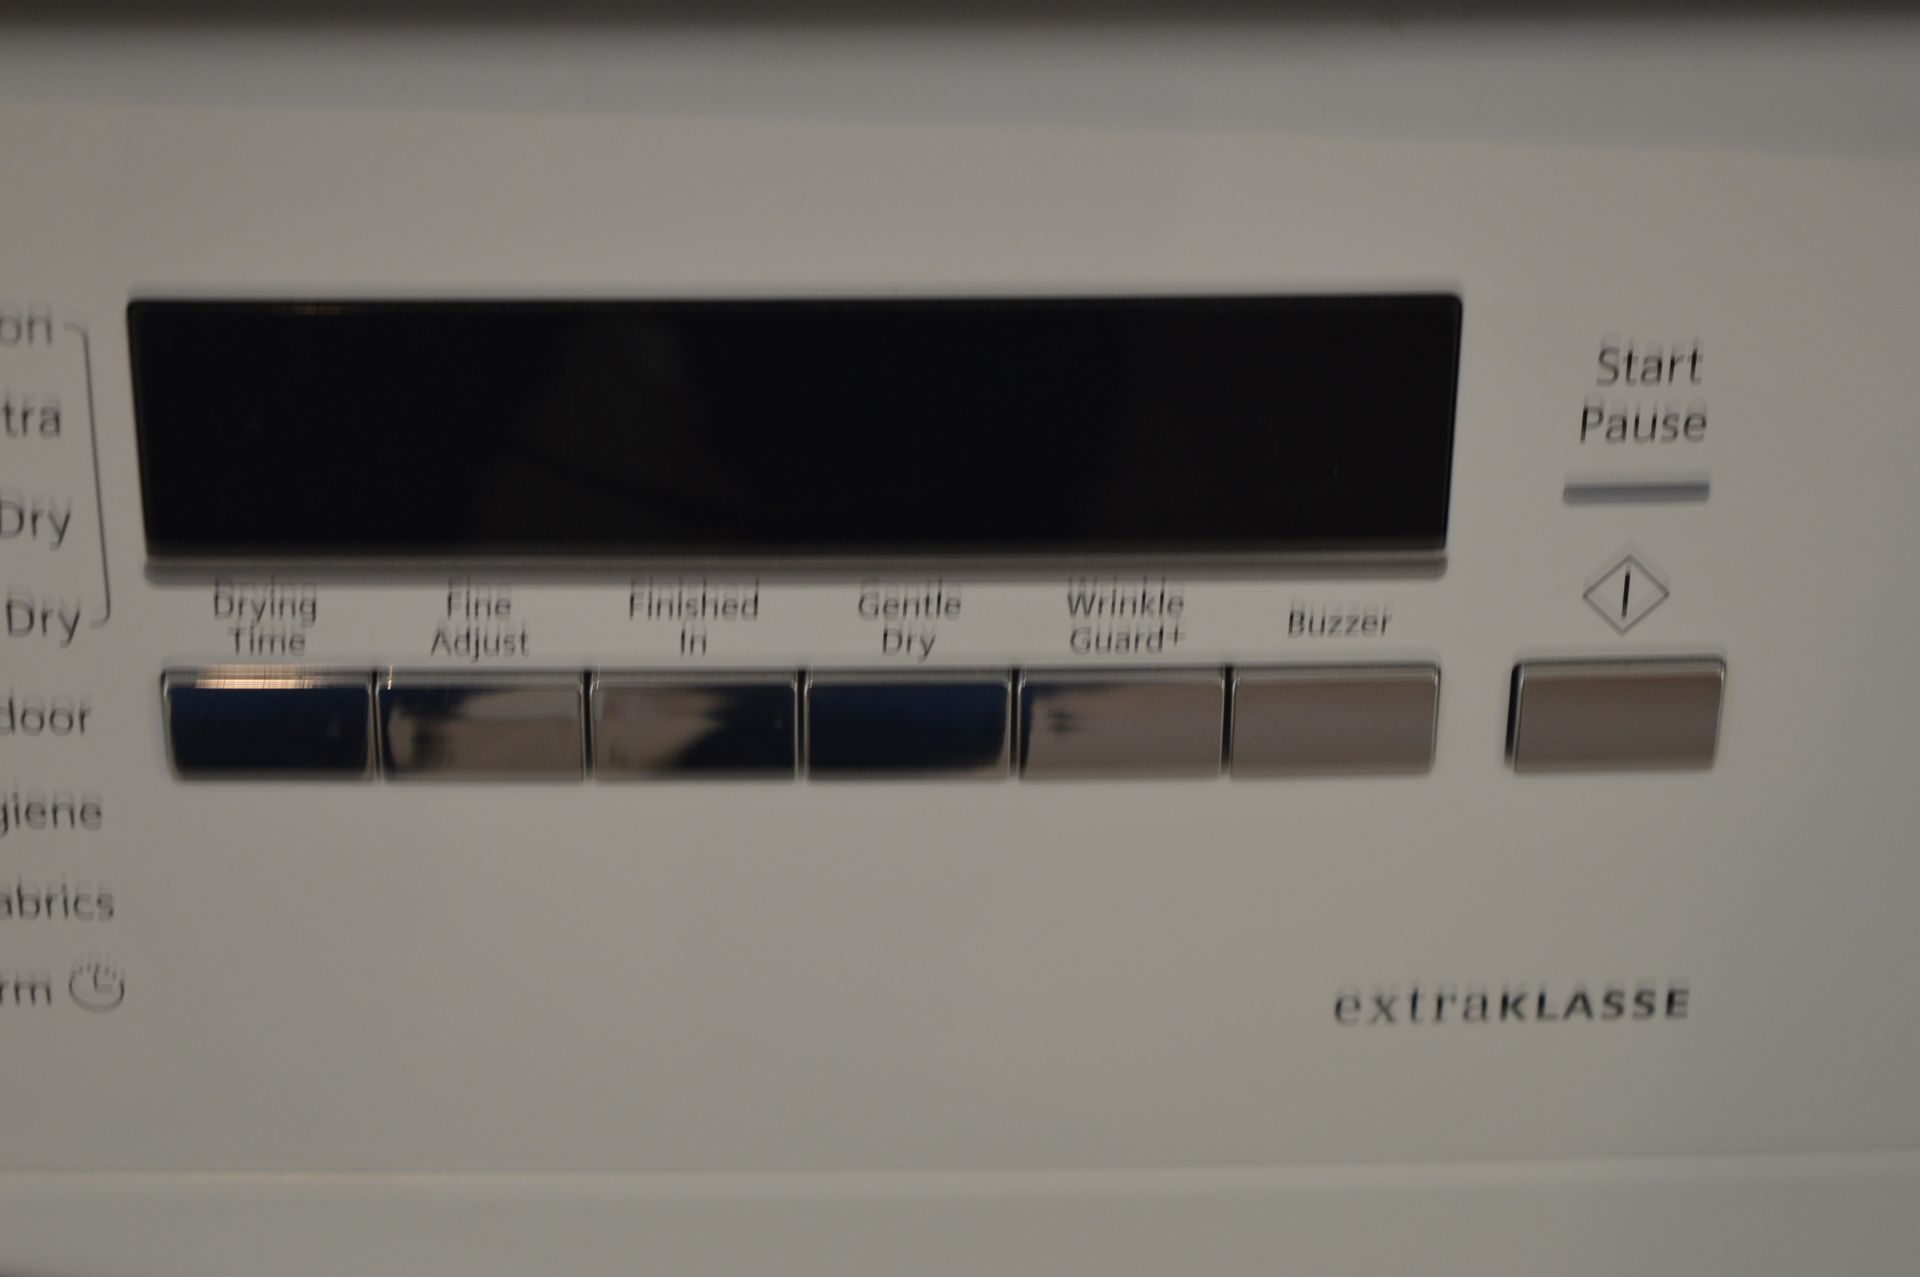 1 x Siemens iQ300 Condenser Dryer - Model WT46B290GB - Recommended Retail Price £519 - High Load 8kg - Image 4 of 8